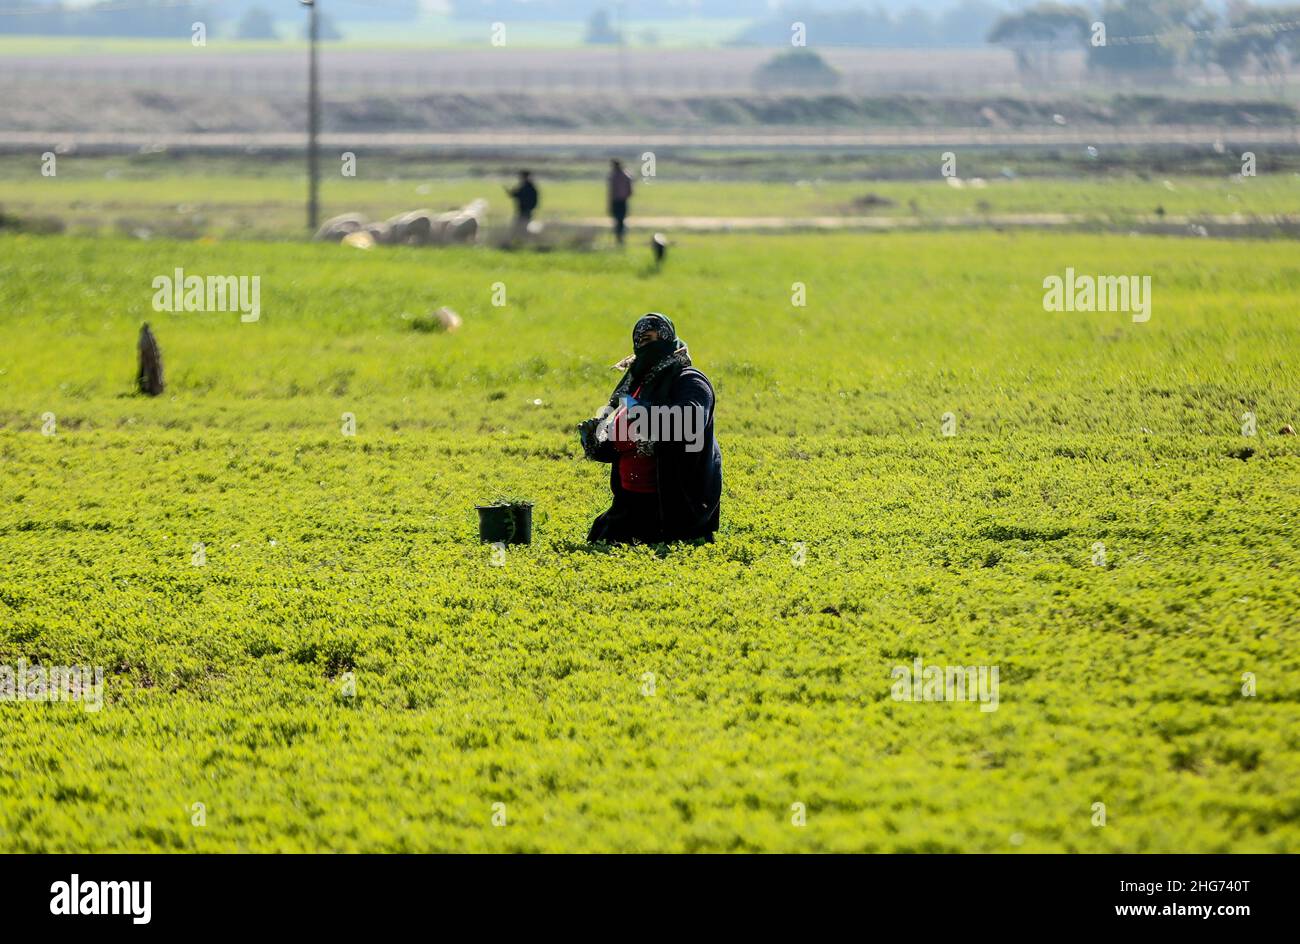 Gaza, Palestine. 18th Jan, 2022. A farmer works on a farm near the fence separating Gaza and Israel, while Israeli military vehicles bulldoze parts of Palestinian agricultural land in Khuza'a, east of Khan Yunis, in the southern Gaza Strip. Credit: SOPA Images Limited/Alamy Live News Stock Photo